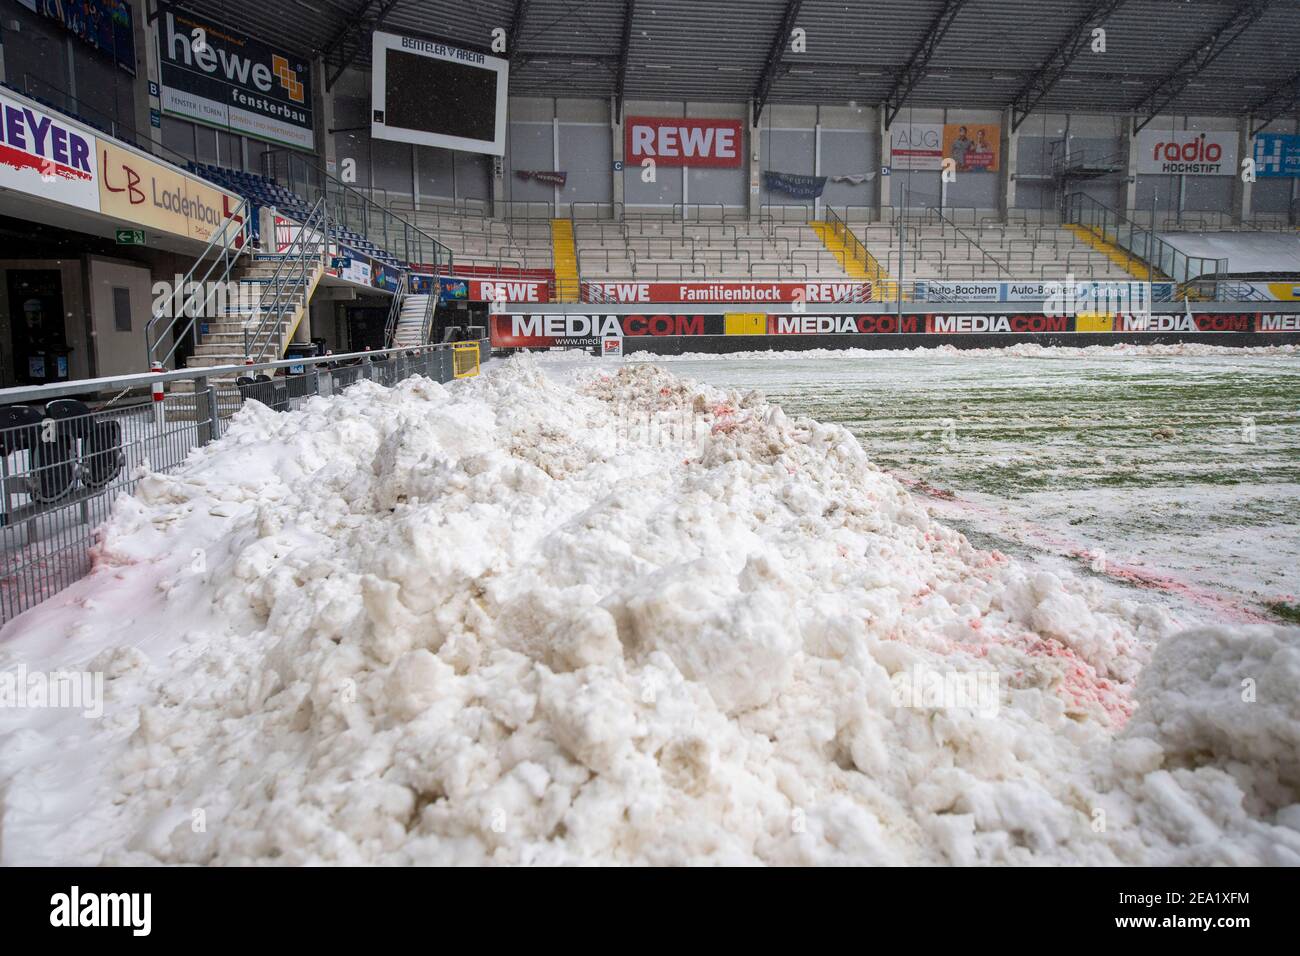 Paderborn, Germany. 07th Feb, 2021. Football: 2. Bundesliga, SC Paderborn 07 - 1. FC Heidenheim, Matchday 20, at Benteler Arena. Chunks of snow are lying on the side of the pitch. Due to the heavy snowfall, the match has been cancelled shortly before kick-off. Credit: David Inderlied/dpa - IMPORTANT NOTE: In accordance with the regulations of the DFL Deutsche Fußball Liga and/or the DFB Deutscher Fußball-Bund, it is prohibited to use or have used photographs taken in the stadium and/or of the match in the form of sequence pictures and/or video-like photo series./dpa/Alamy Live News Stock Photo